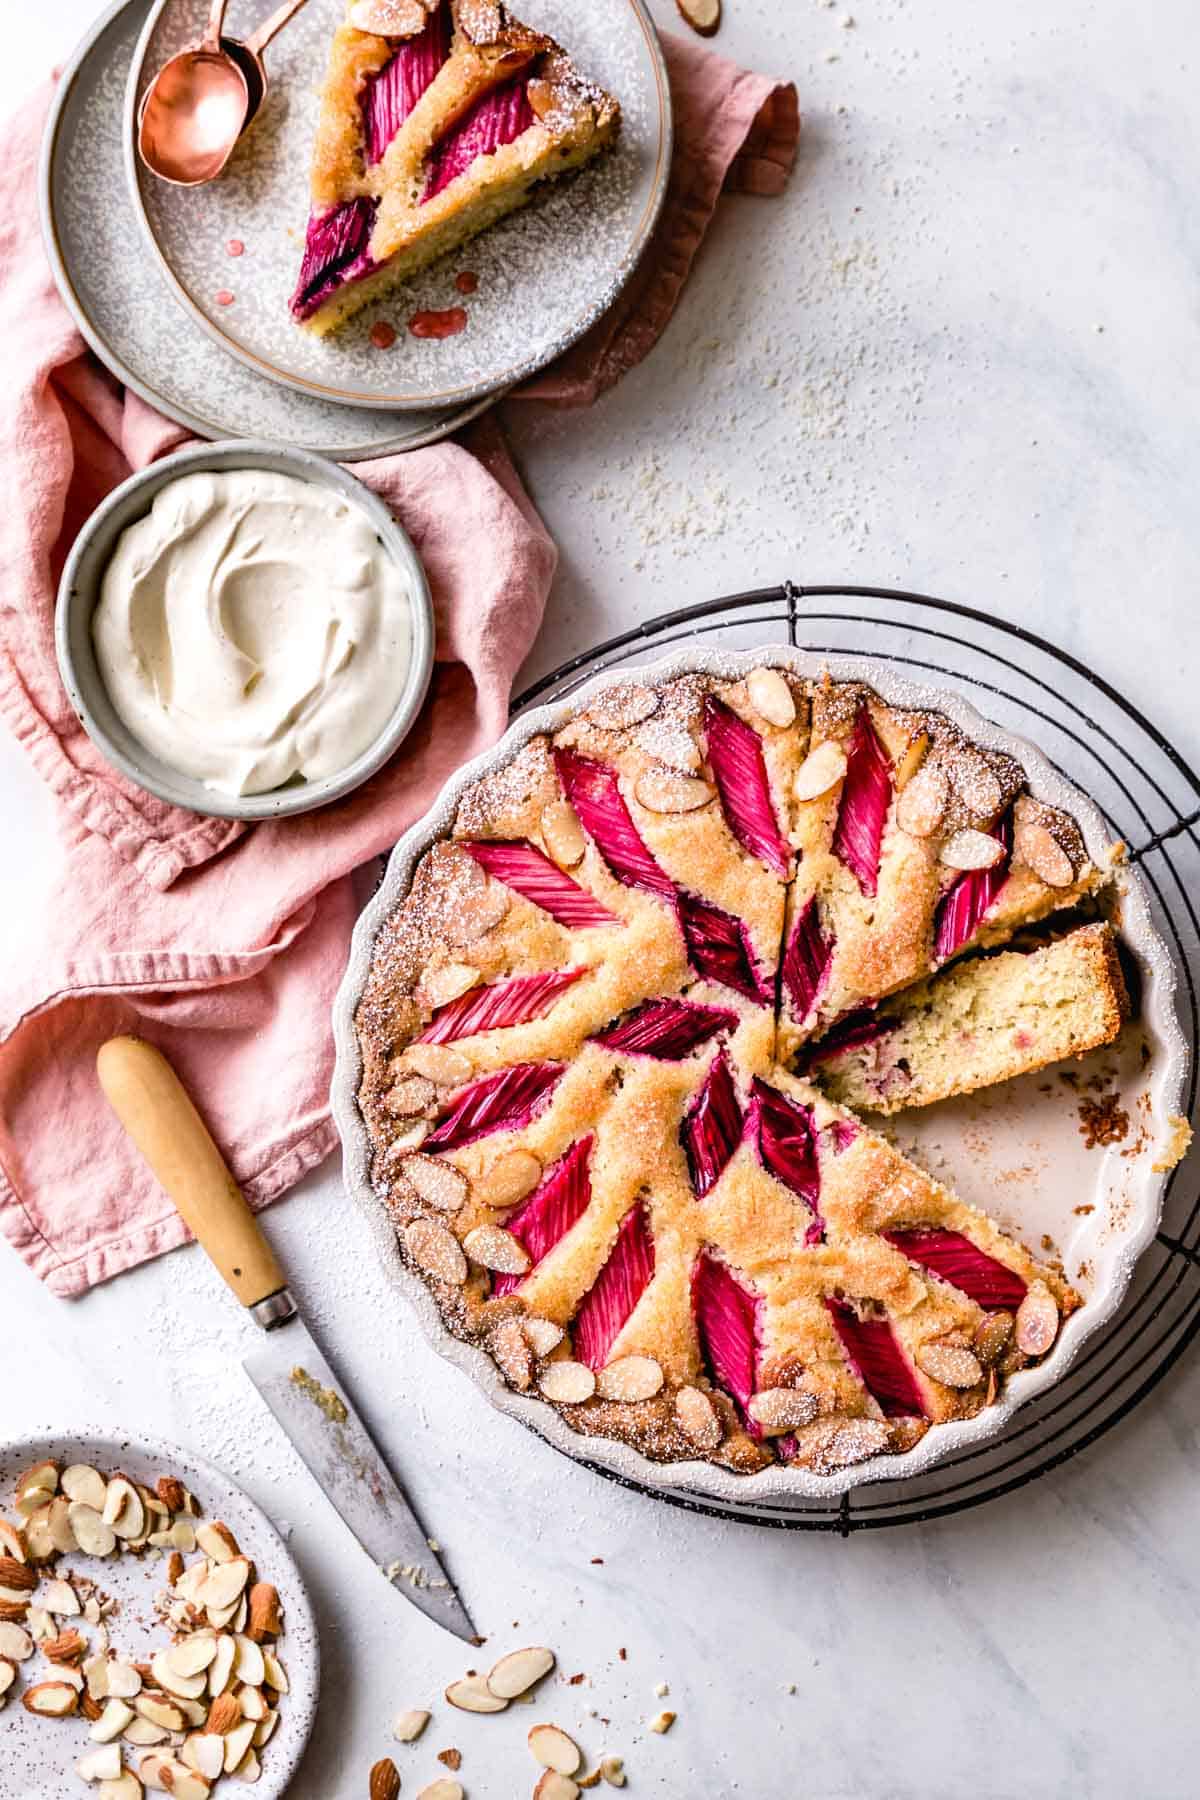 rhubarb almond cake, overhead, with a pink linen, knife, and slices on plates